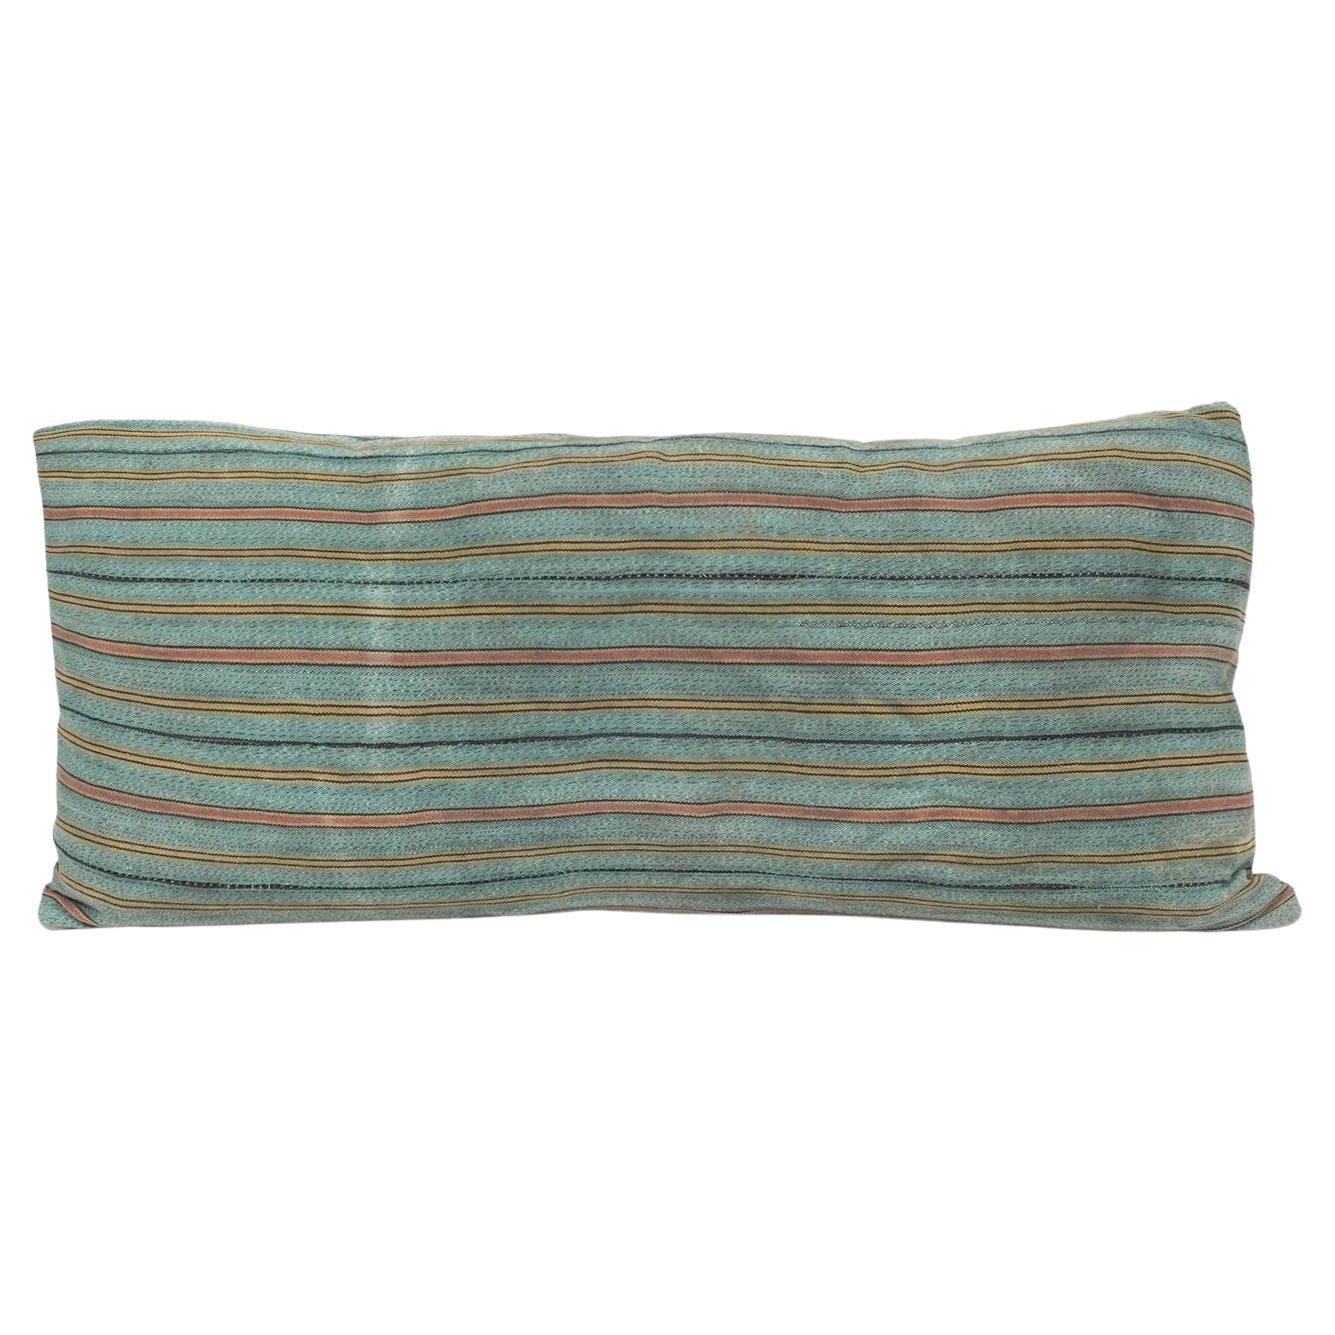 Large Teal, Gold, Navy and Coral Striped Lumbar Cushion For Sale